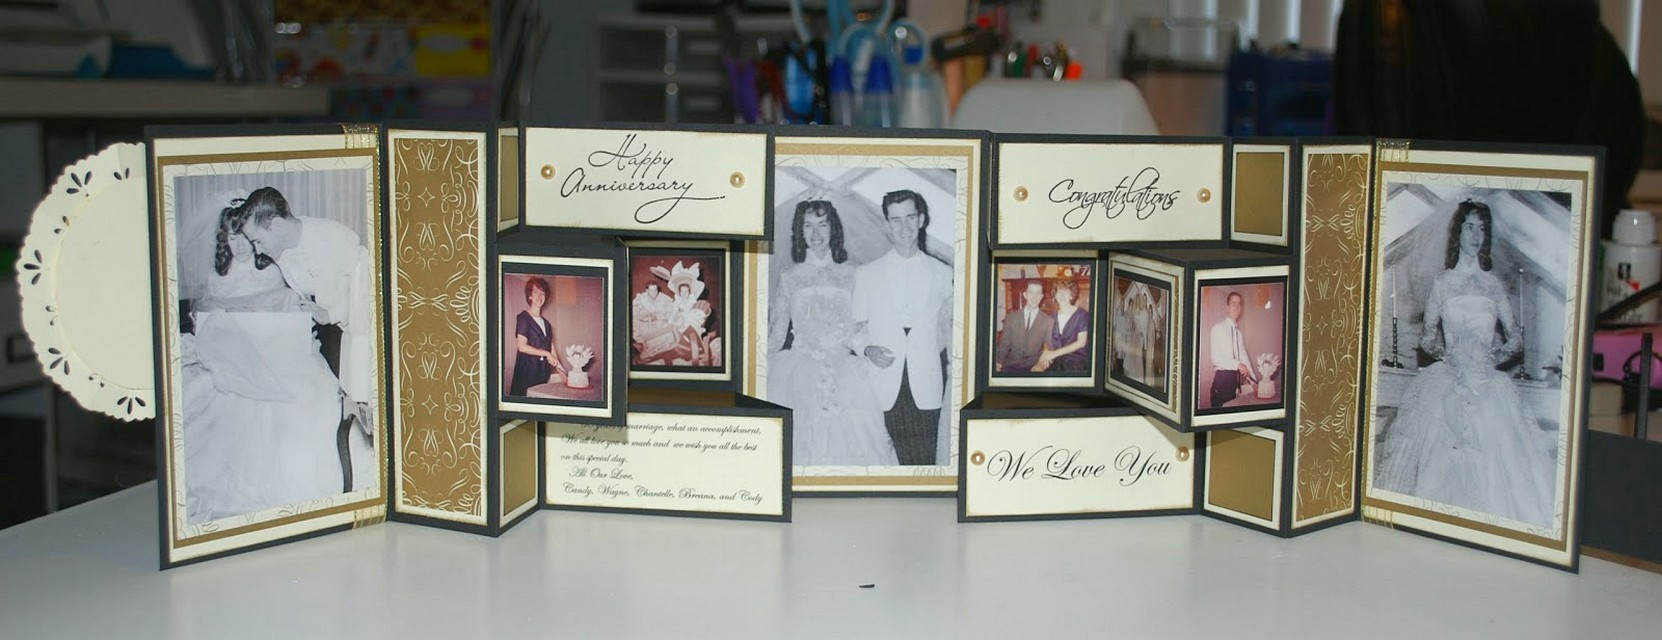 Gift Ideas For Parents 50Th Wedding Anniversary
 What You Have to Think About 50th Wedding Anniversary